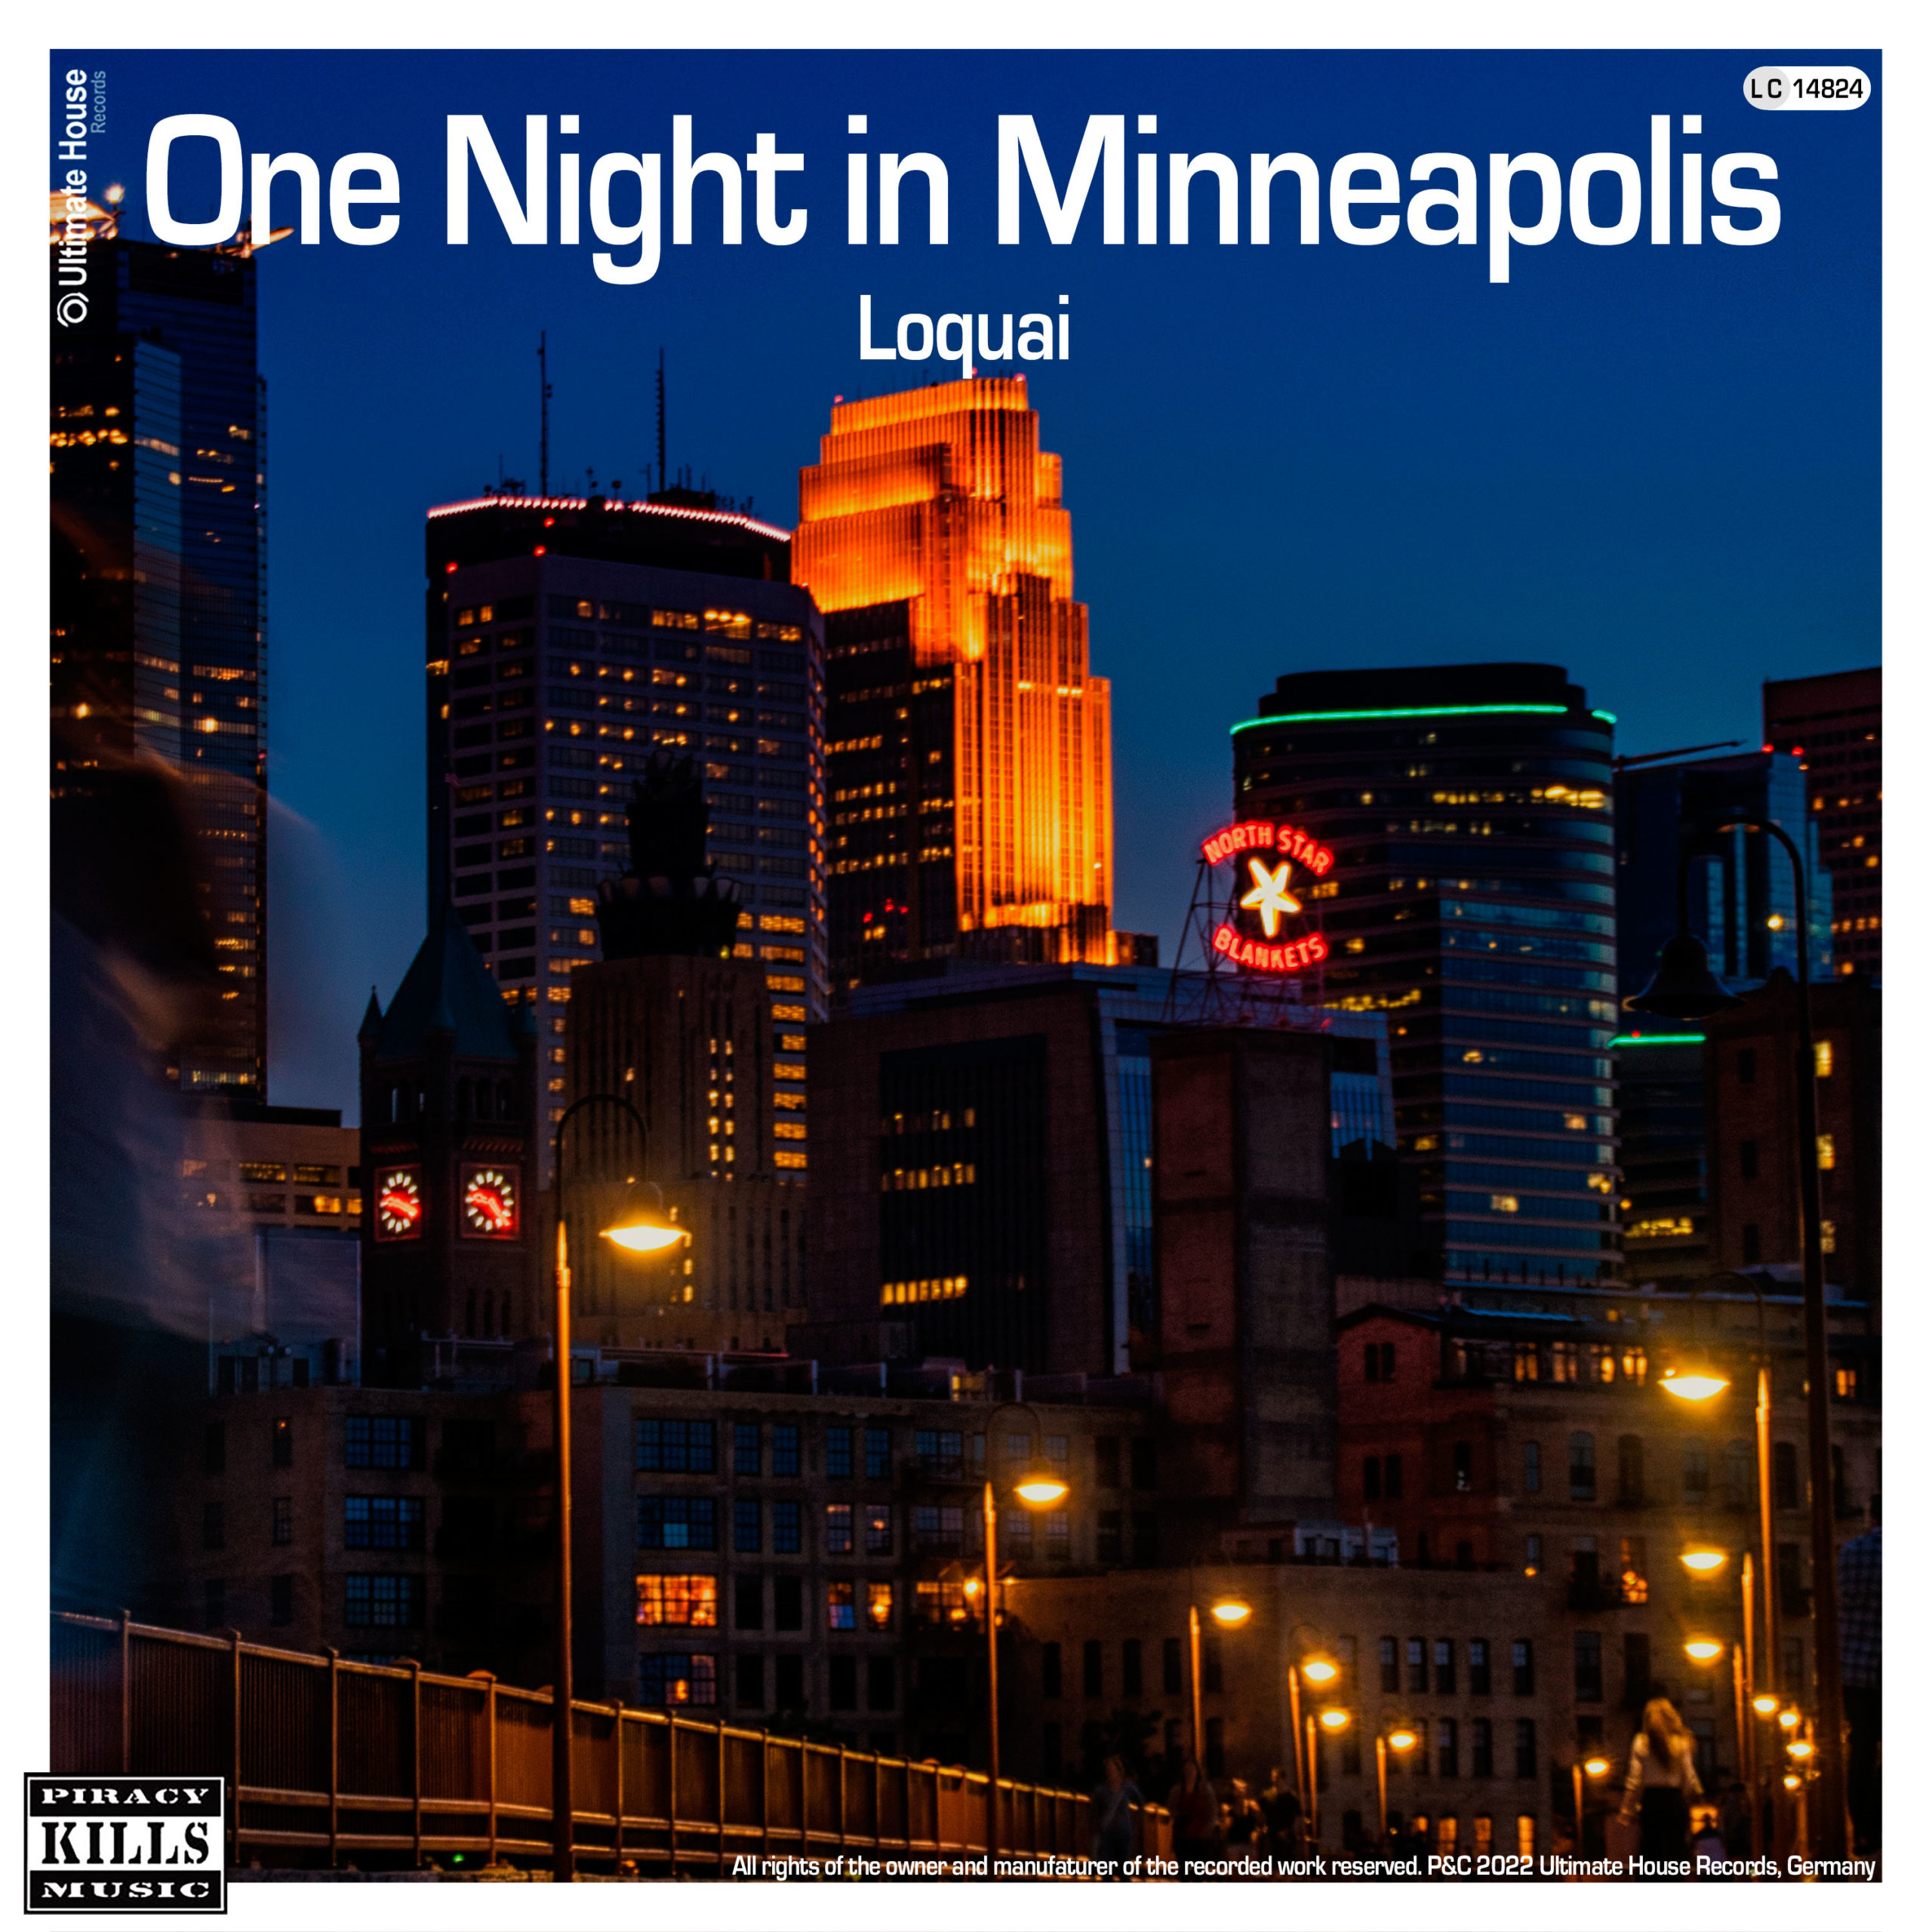 https://www.ultimate-house-records.com/wp-content/uploads/2022/03/157-One_Night_in_Minneapolis-Cover_3000px_web-scaled.jpg